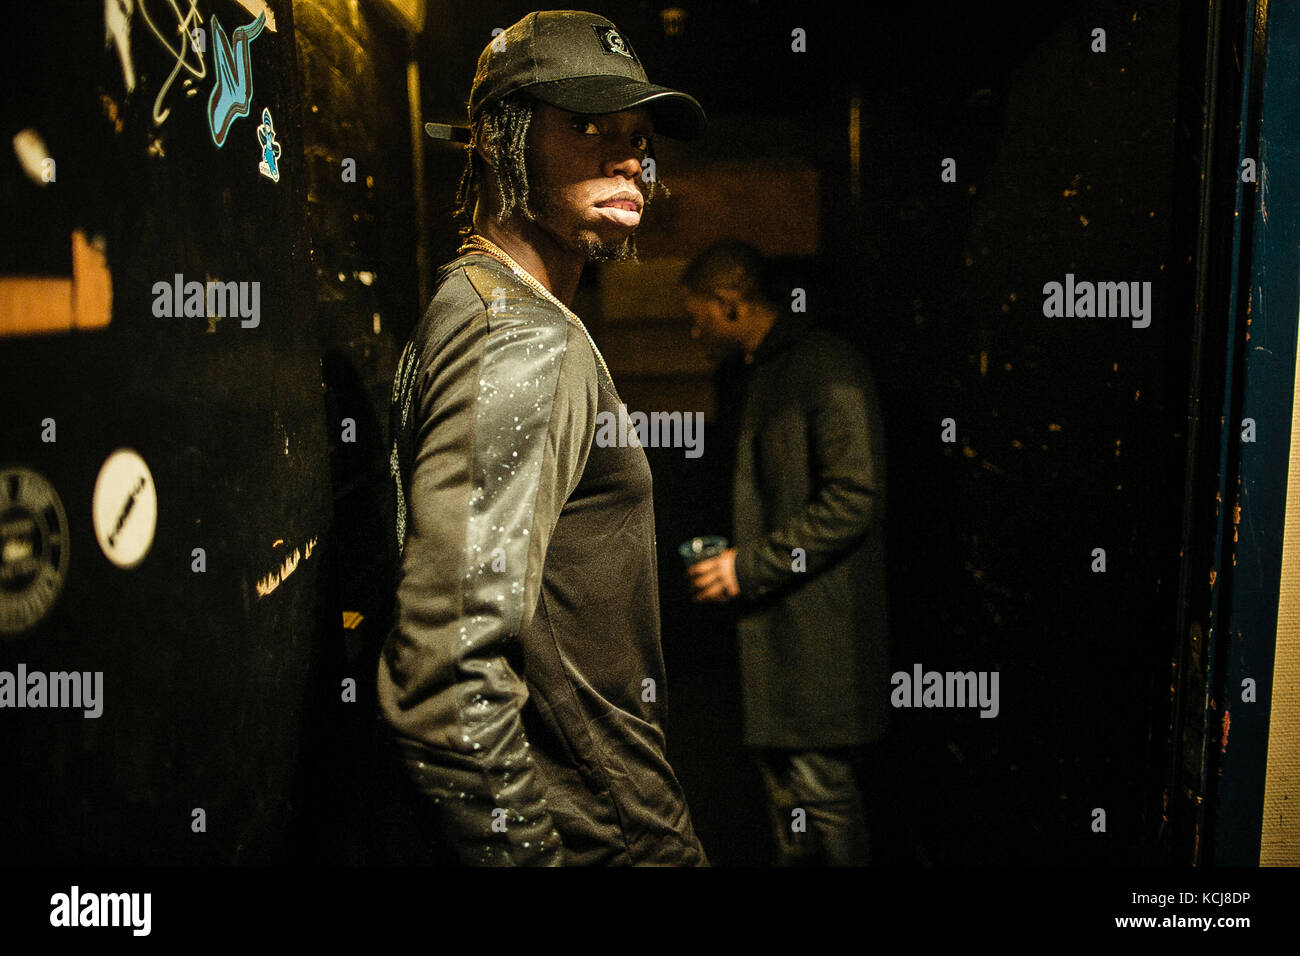 Rapper Casyo “Krept” Johnson of the English hip hop and grime rap duo Krept and Konan is portrayed backstage before a live concert at Pumpehuset in Copenhagen. Denmark, 05/12 2015. Stock Photo